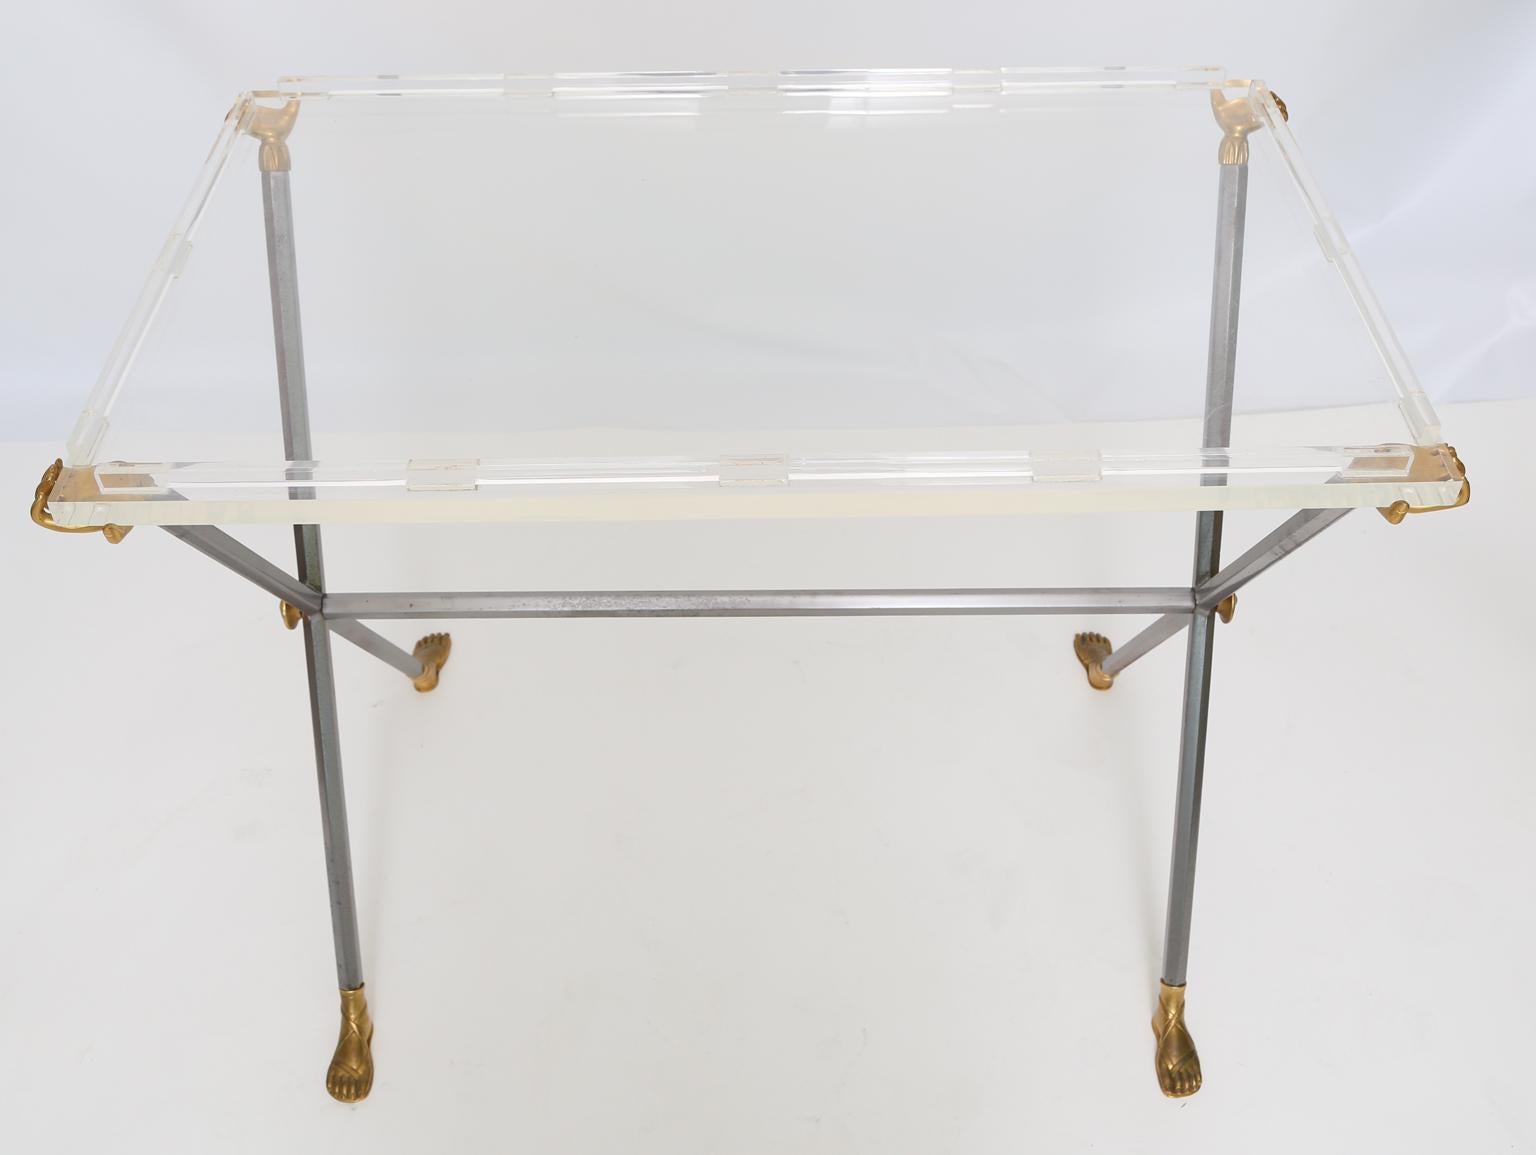 Unusual tray table, having a rectangular top of Lucite, on X-frame stand of steel and brass, joined by stretcher, four-cast hands hold the acrylic table surface, with four sandaled feet finishing the base. 

Stock ID: D2532.